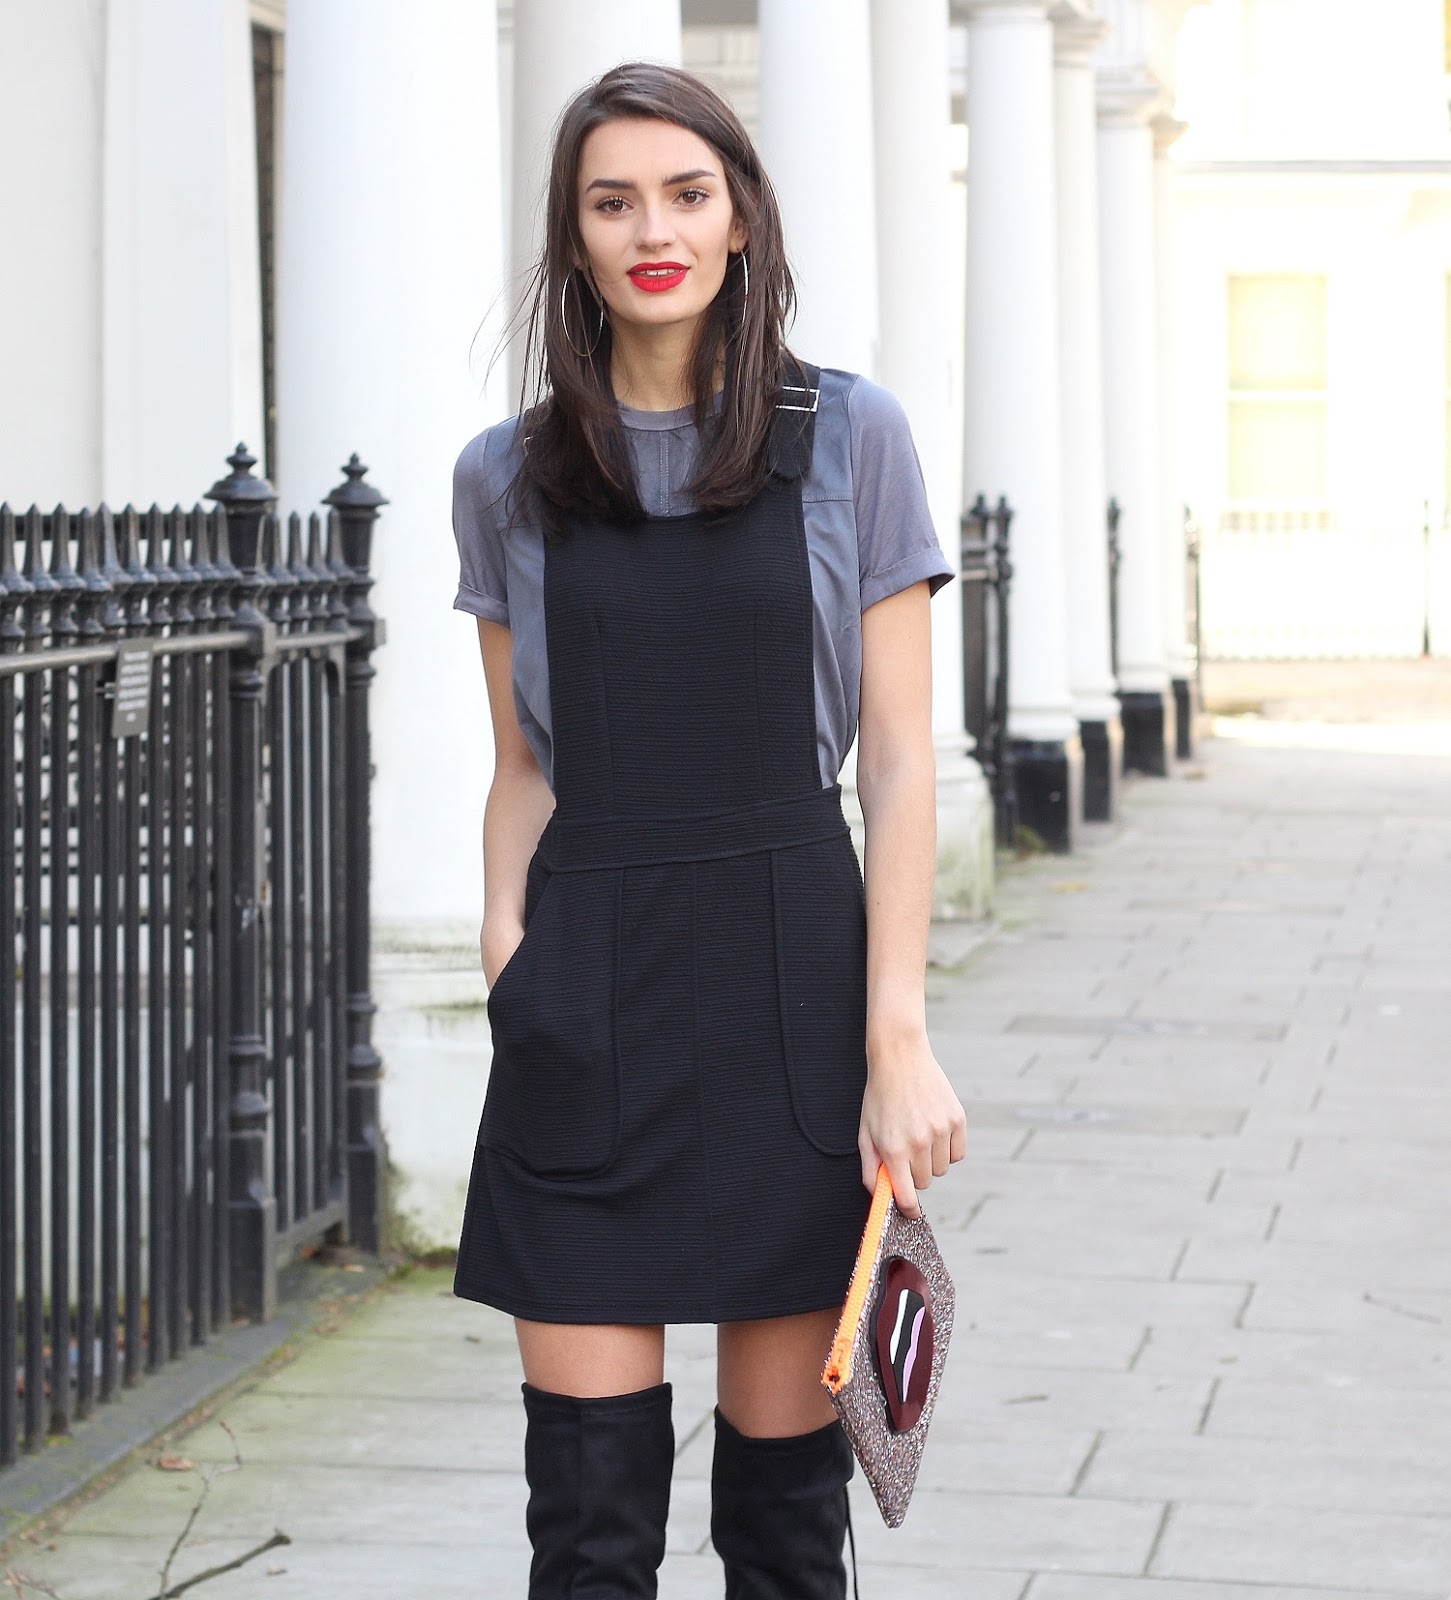 peexo fashion blogger wearing black pinafore dress and knee high boots